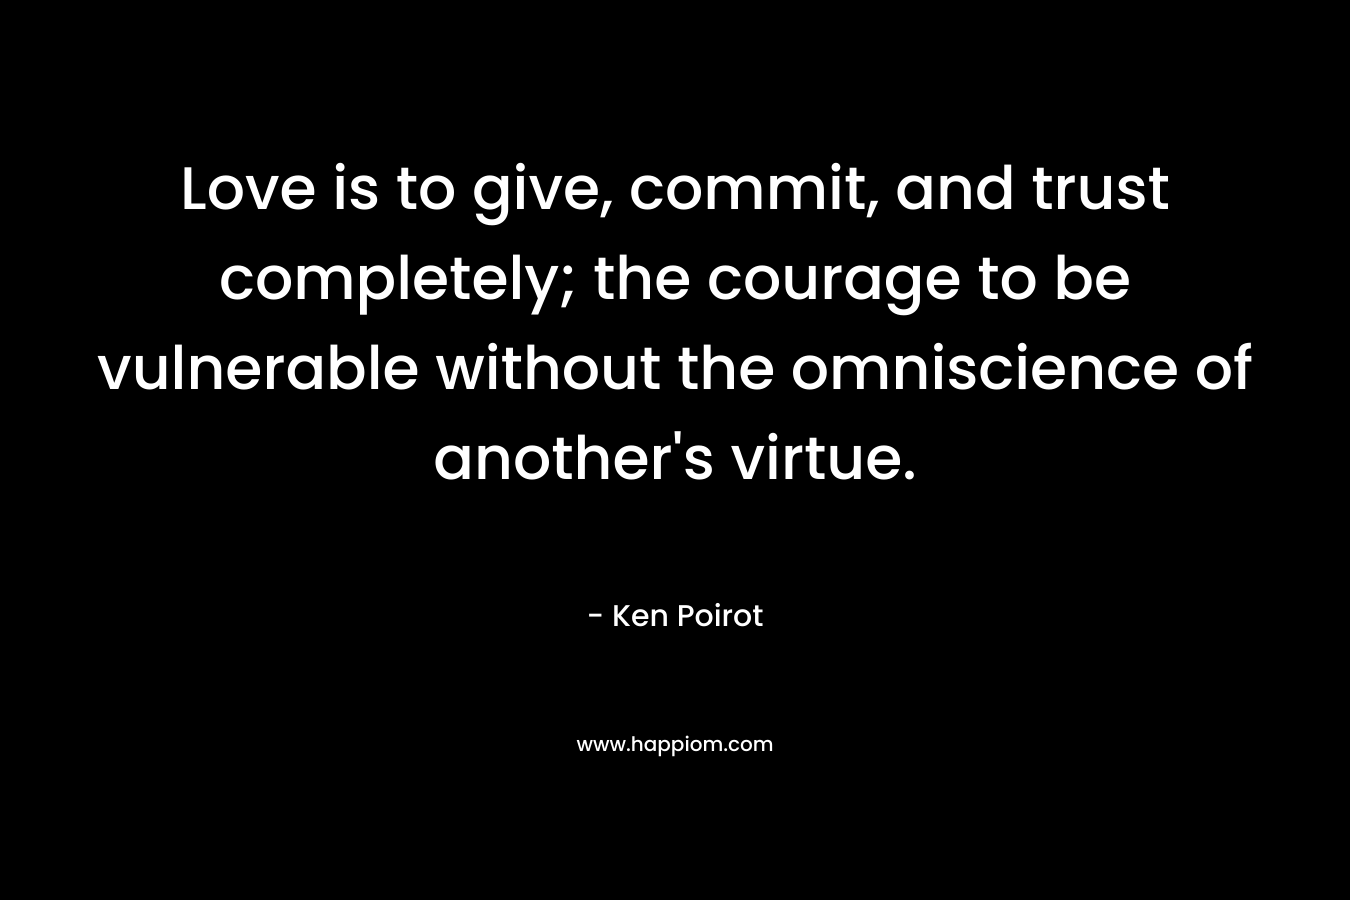 Love is to give, commit, and trust completely; the courage to be vulnerable without the omniscience of another’s virtue. – Ken Poirot